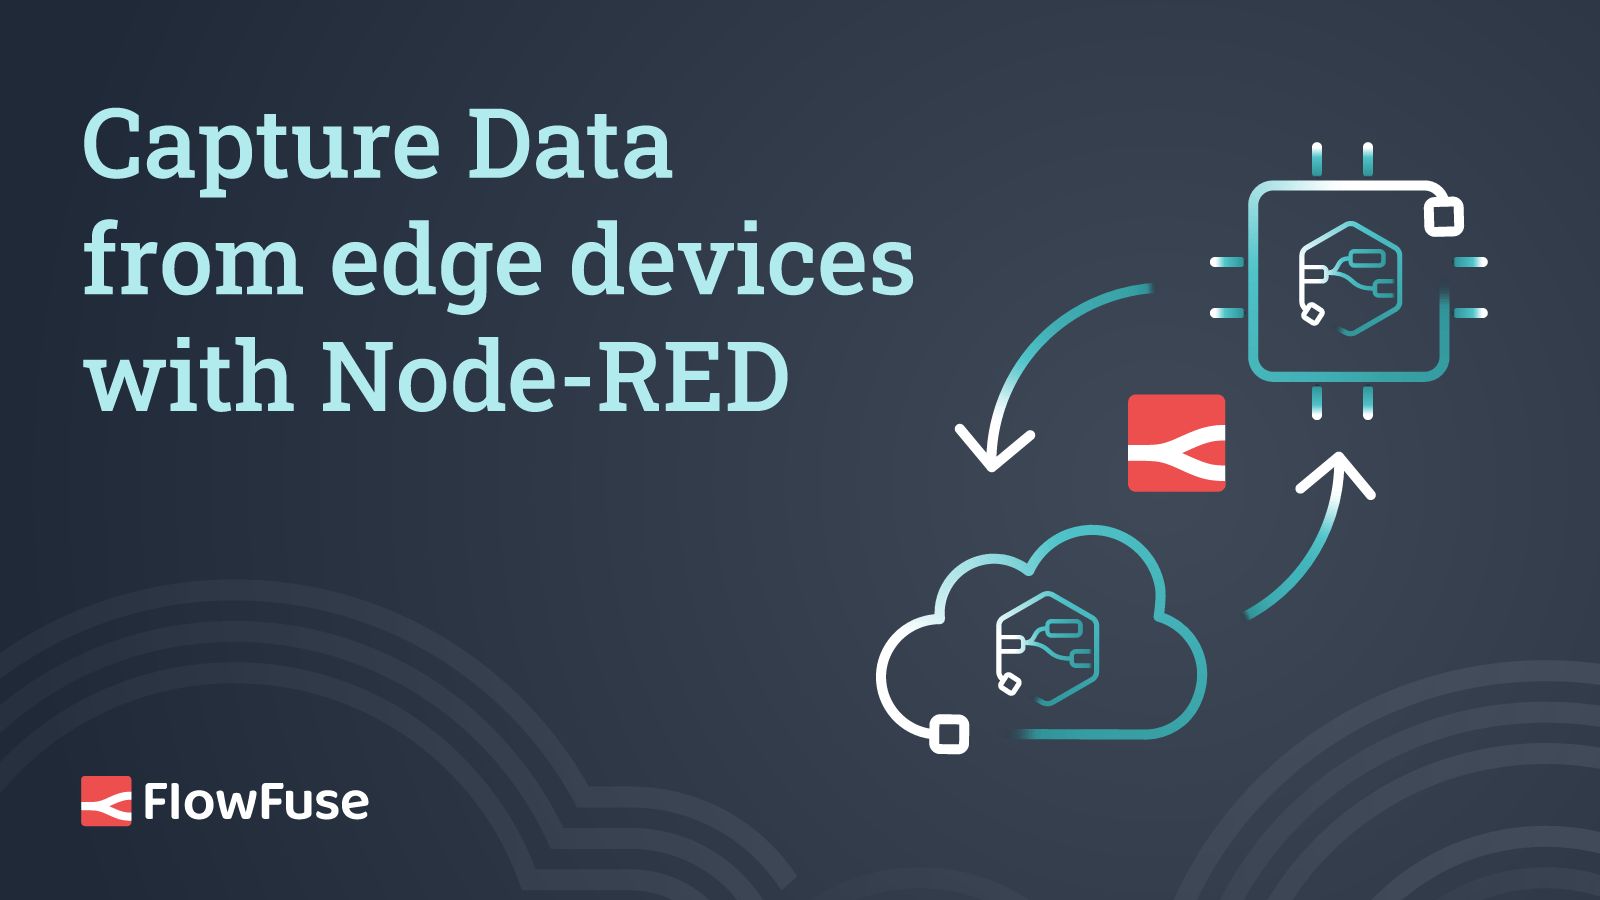 Image representing Capture Data from edge devices with Node-RED